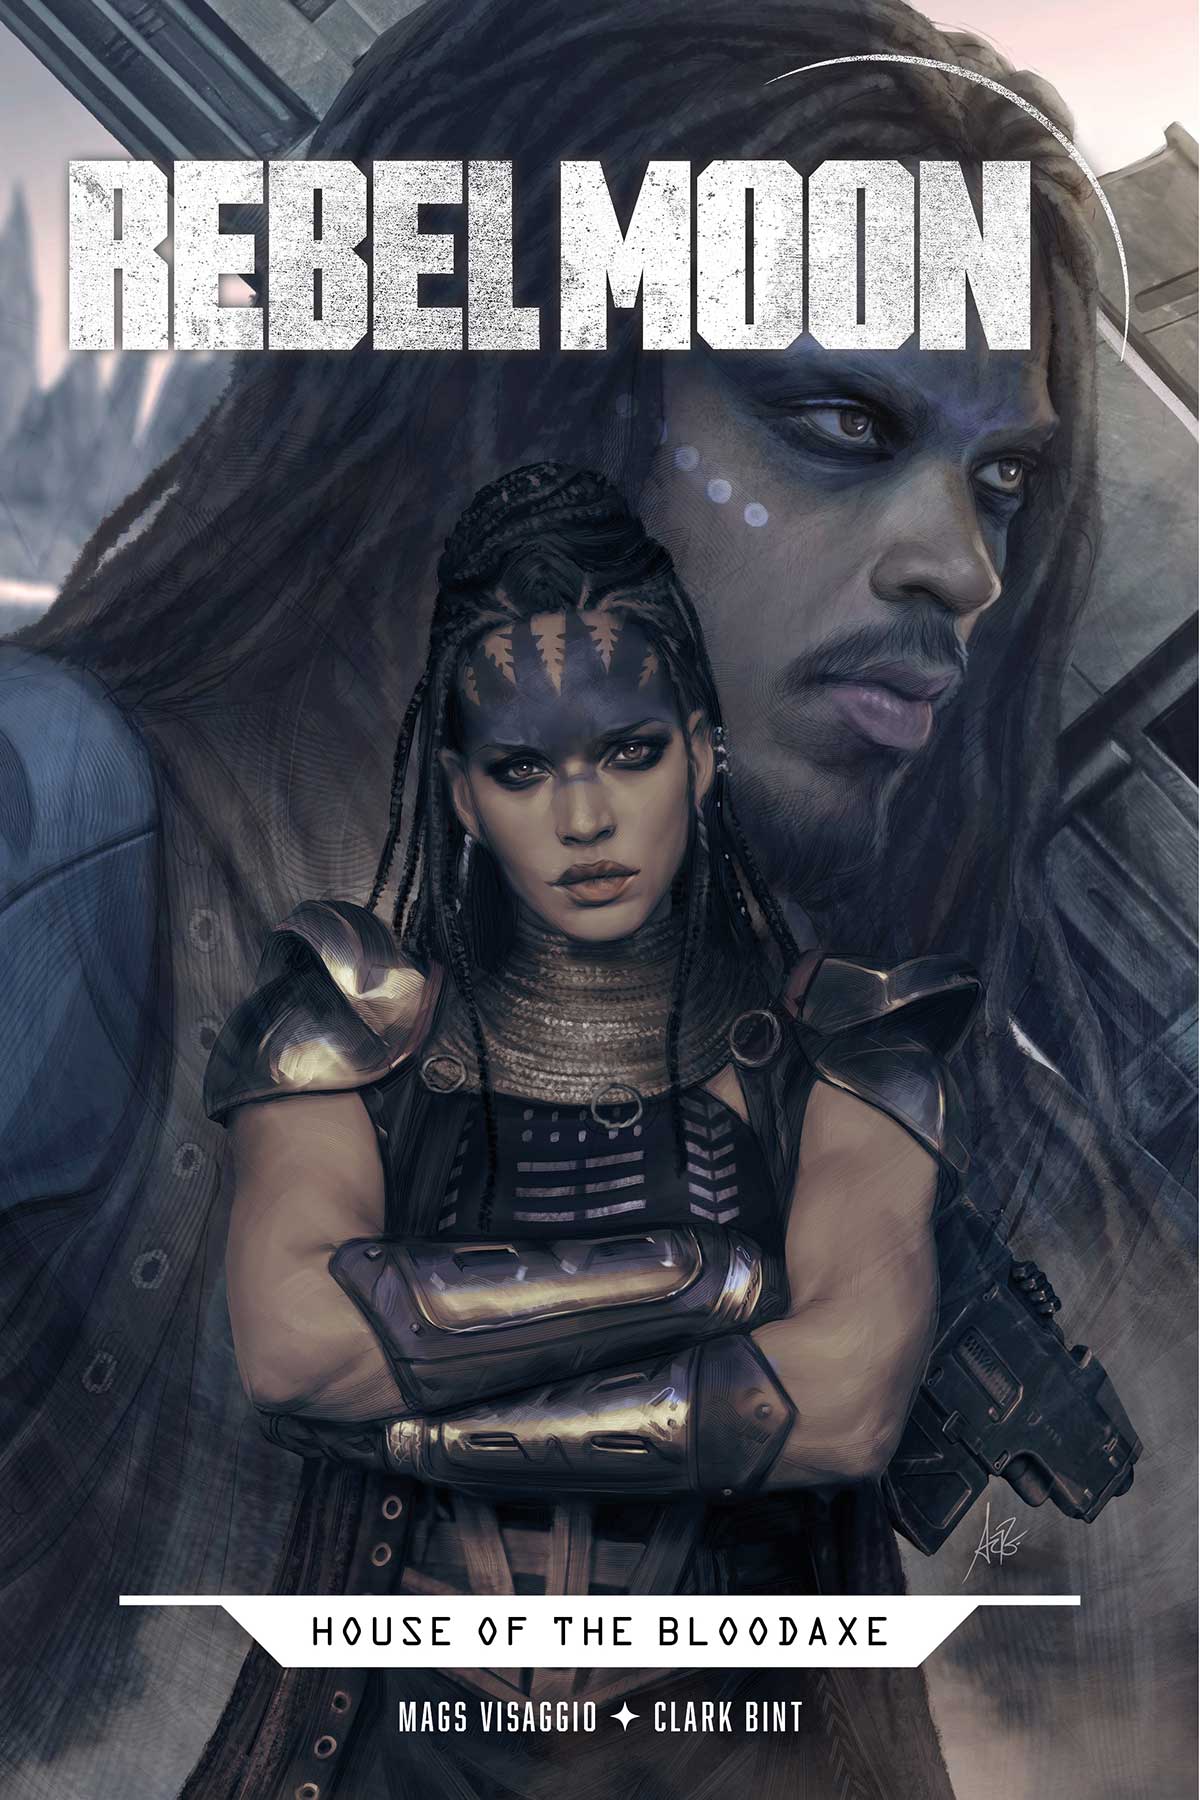 New character posters for Zack Snyder's 'REBEL MOON' have been released. :  r/netflix